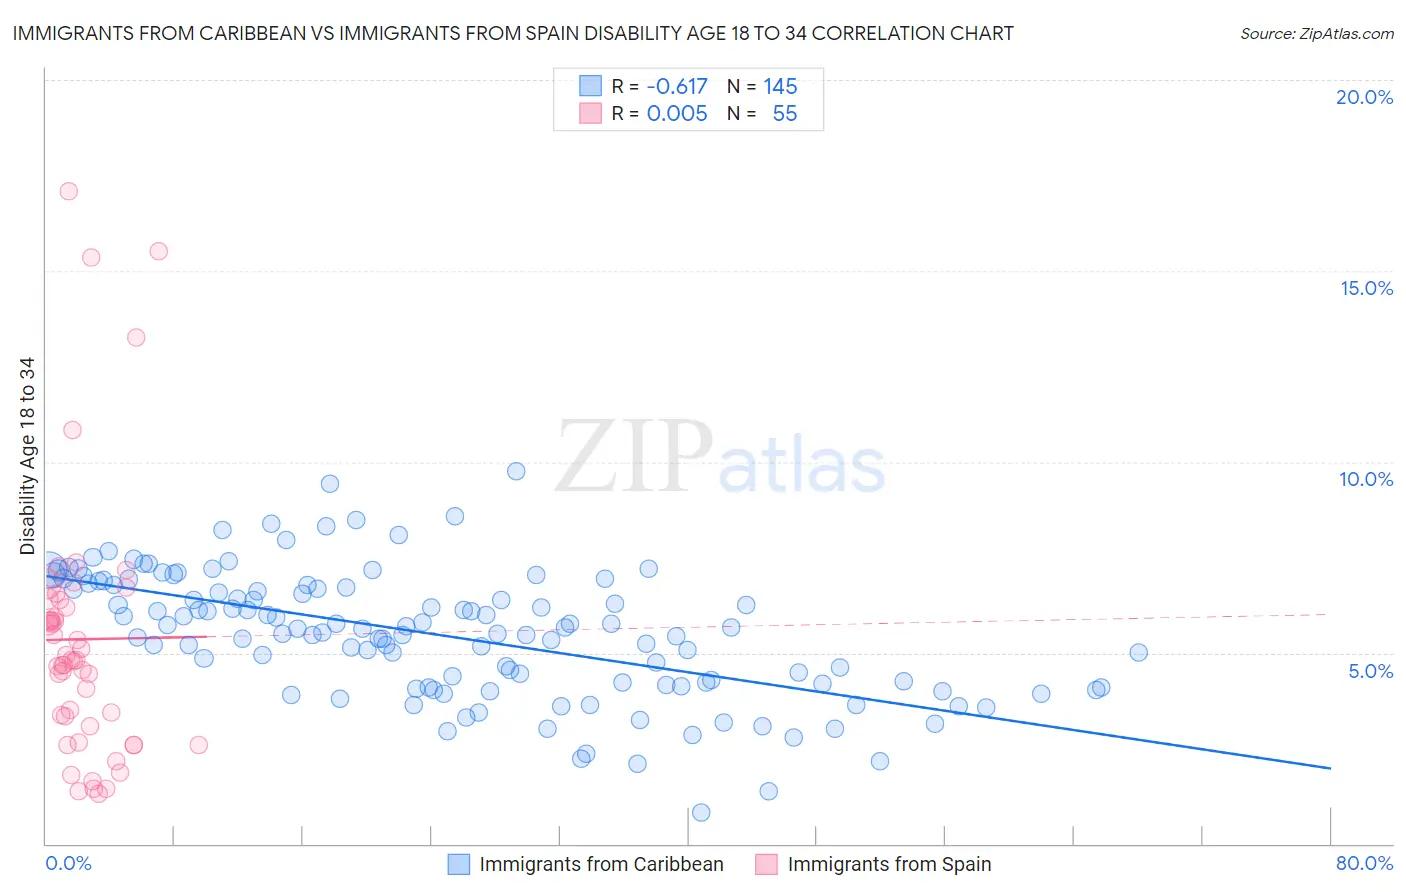 Immigrants from Caribbean vs Immigrants from Spain Disability Age 18 to 34